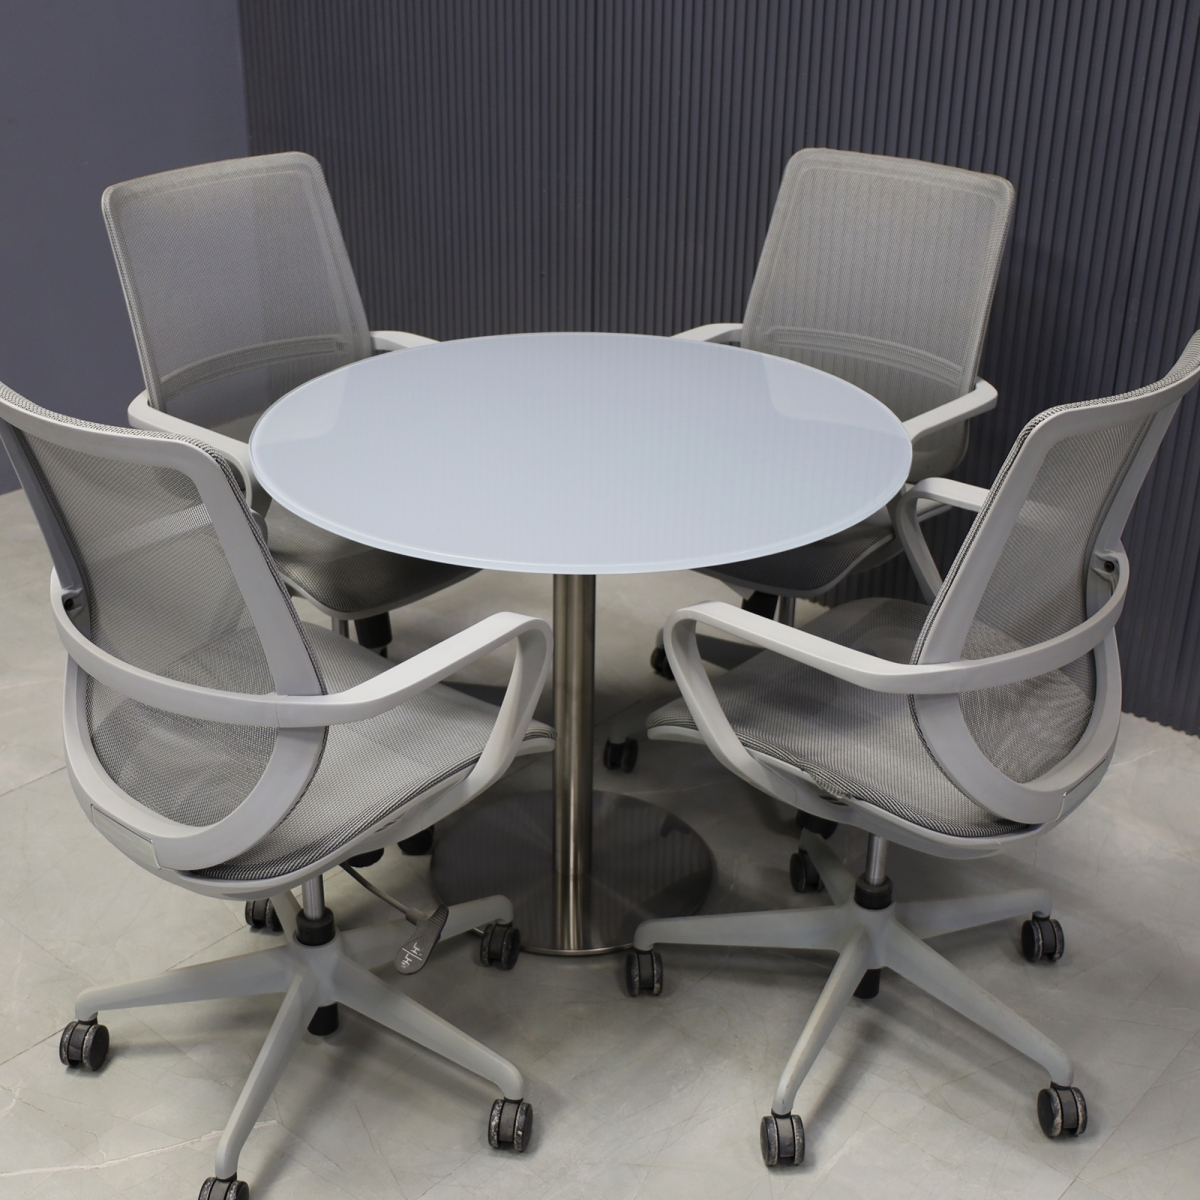 California Round Cafeteria Table with Light Gray Tempered Glass Top - 36 In. - Stock #63